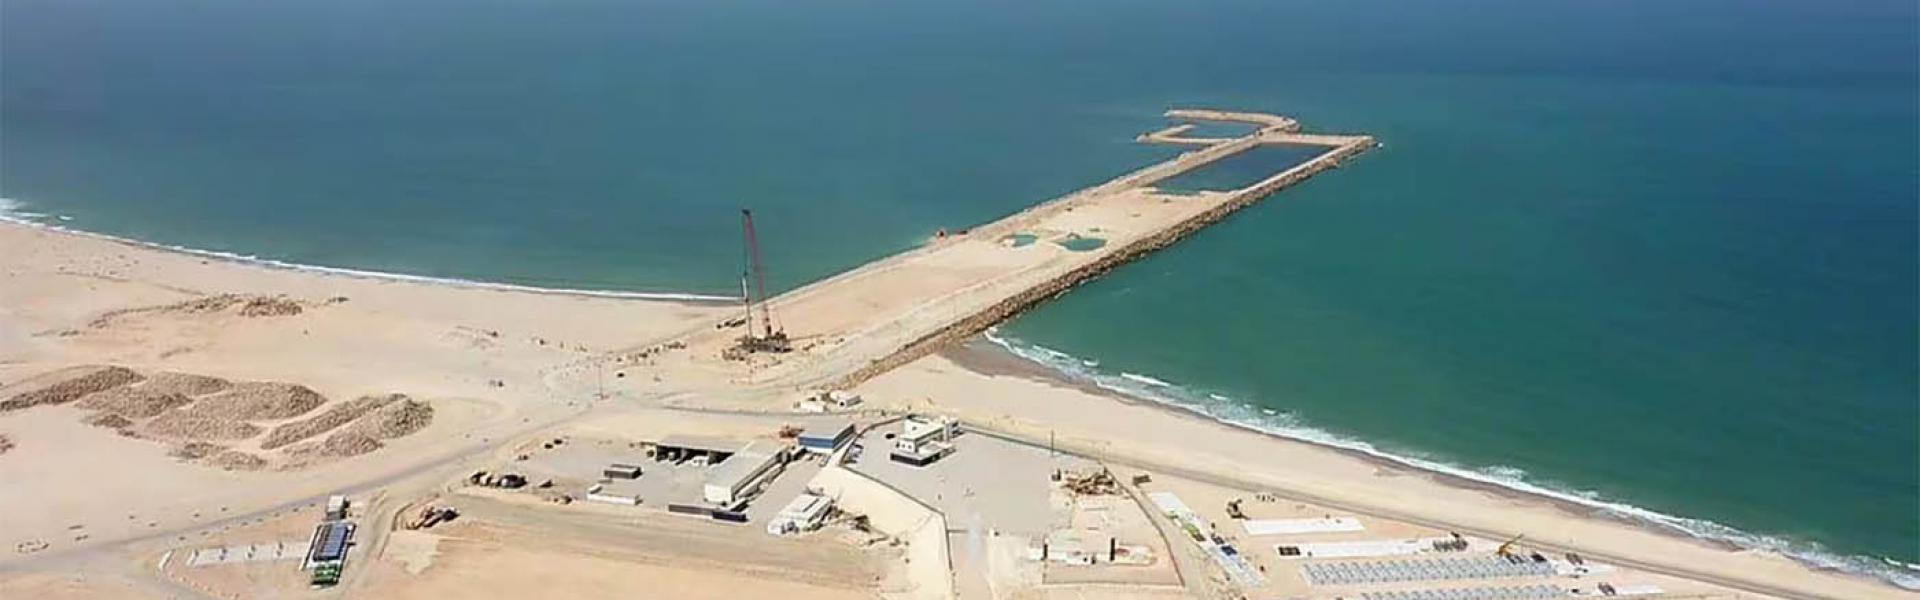 Dakhla port will be the gateway to African countries' trade